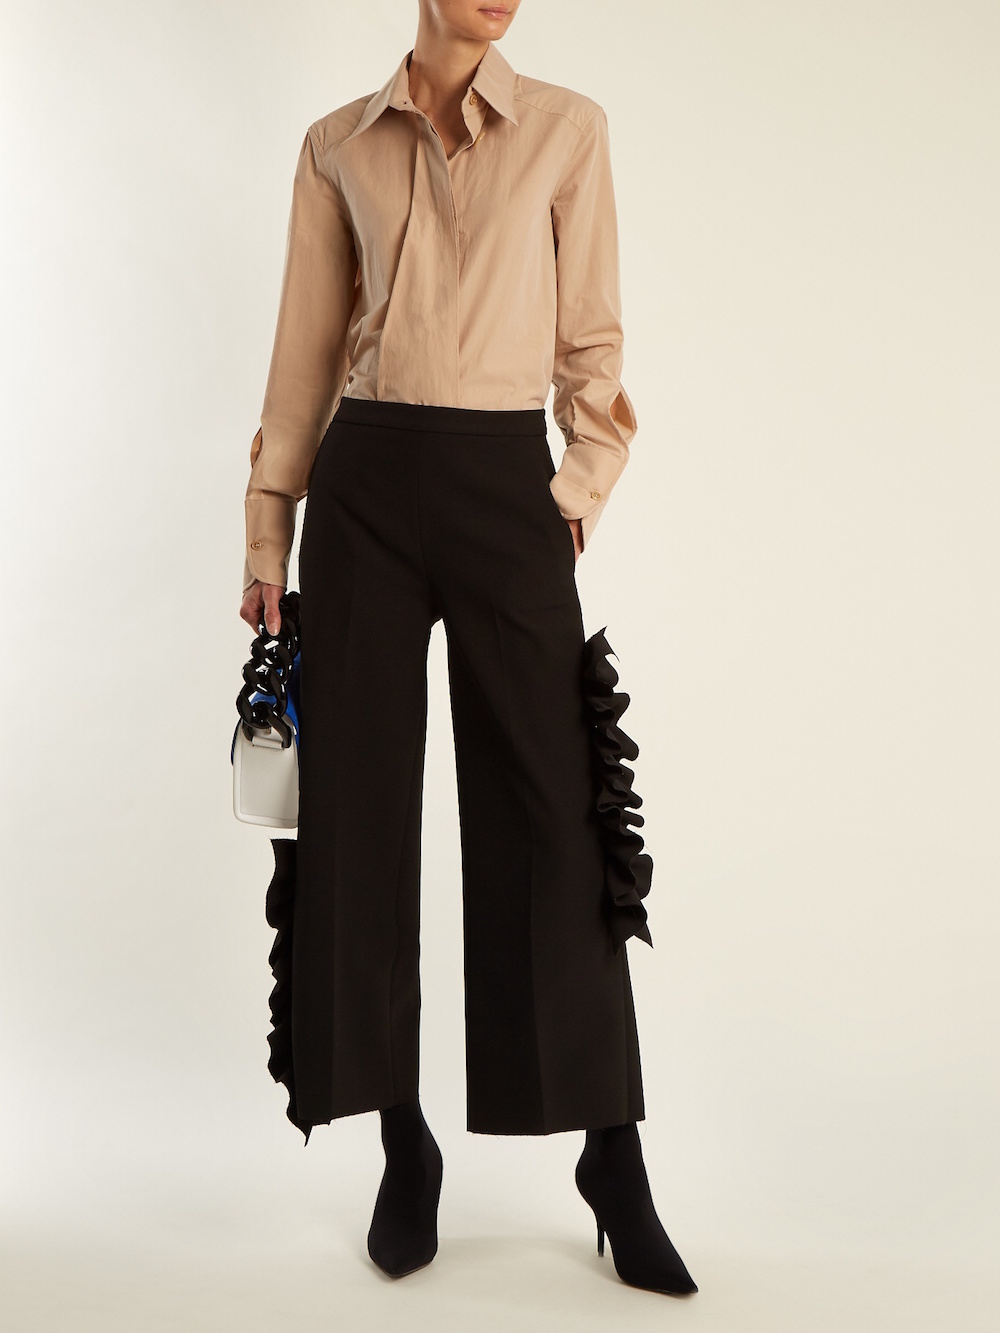 Wide-Leg Pants Are the New Skinnies - theFashionSpot